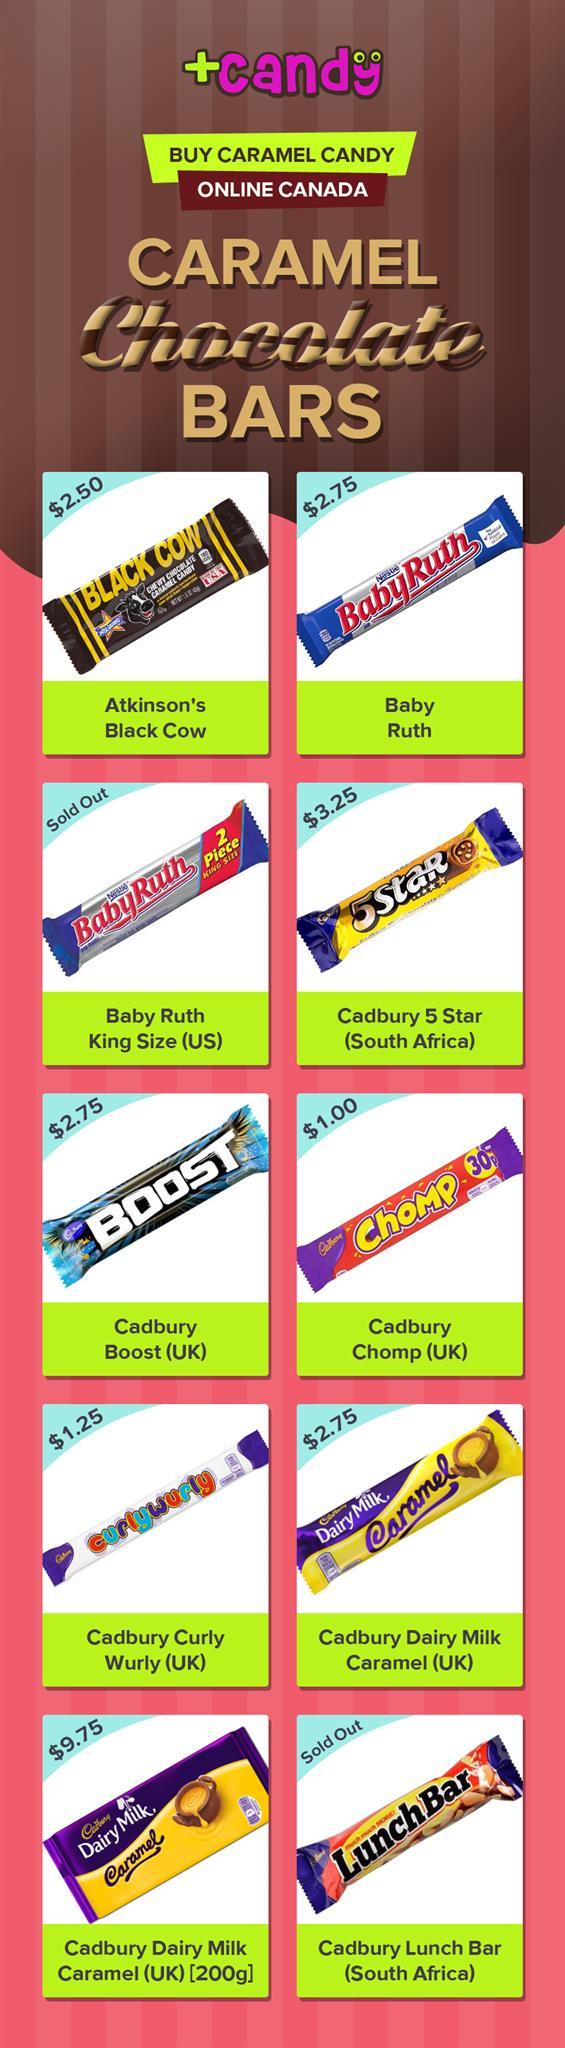 Buy Caramel Candies & Chocolate Bars Online from Plus Candy